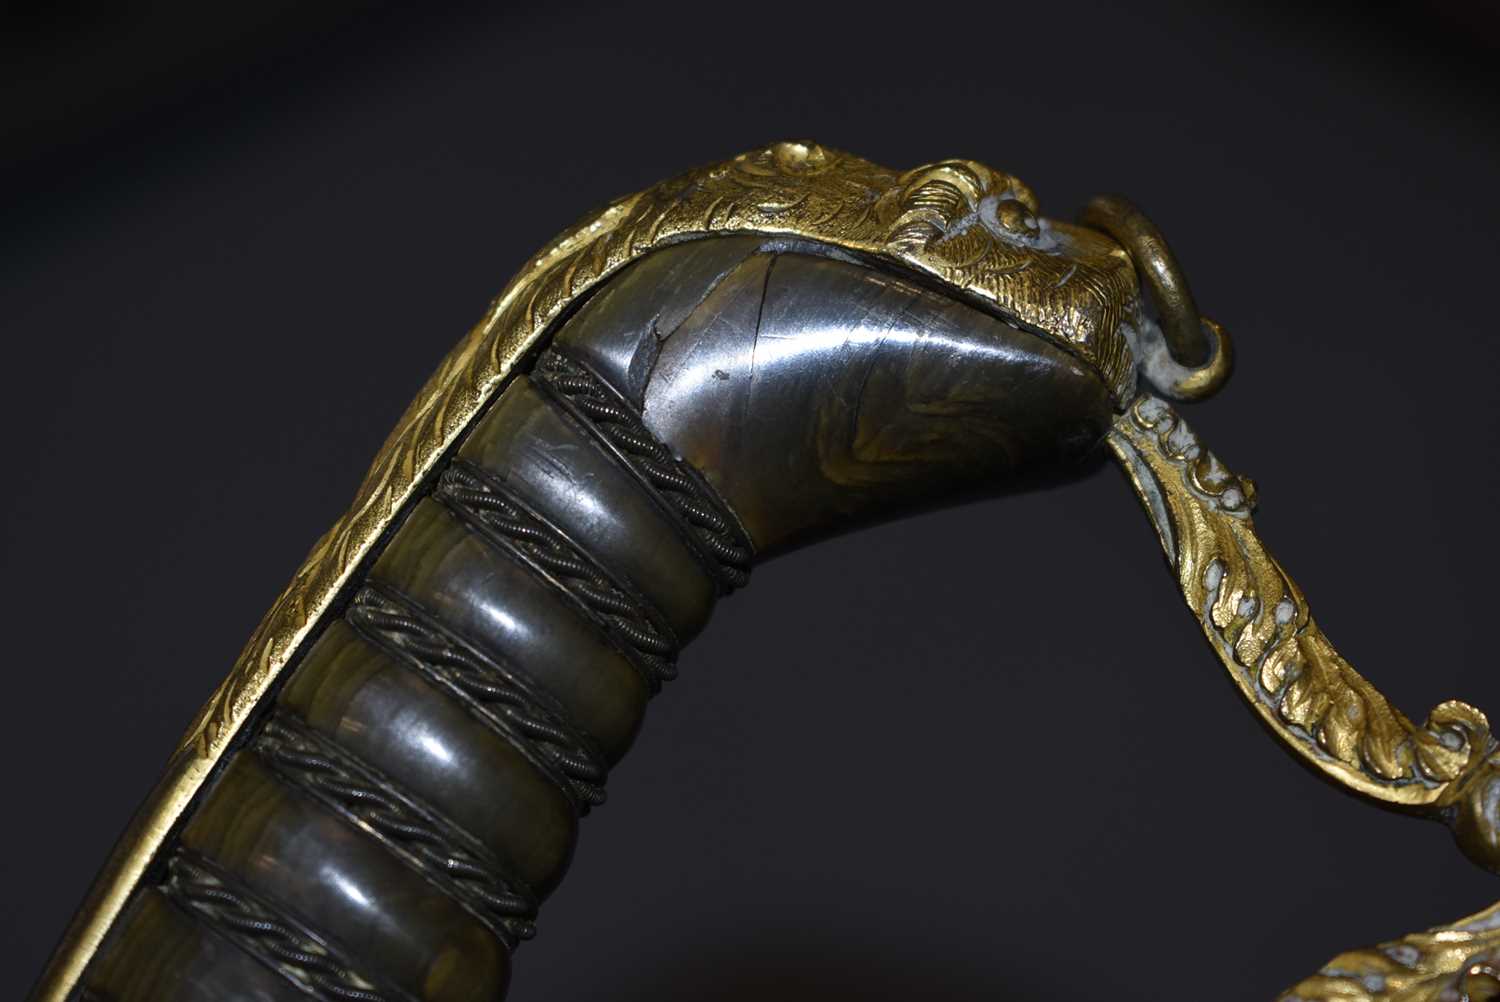 AN ORNATELY MOUNTED GEORGIAN NAVAL OFFICER'S SWORD, - Image 17 of 18